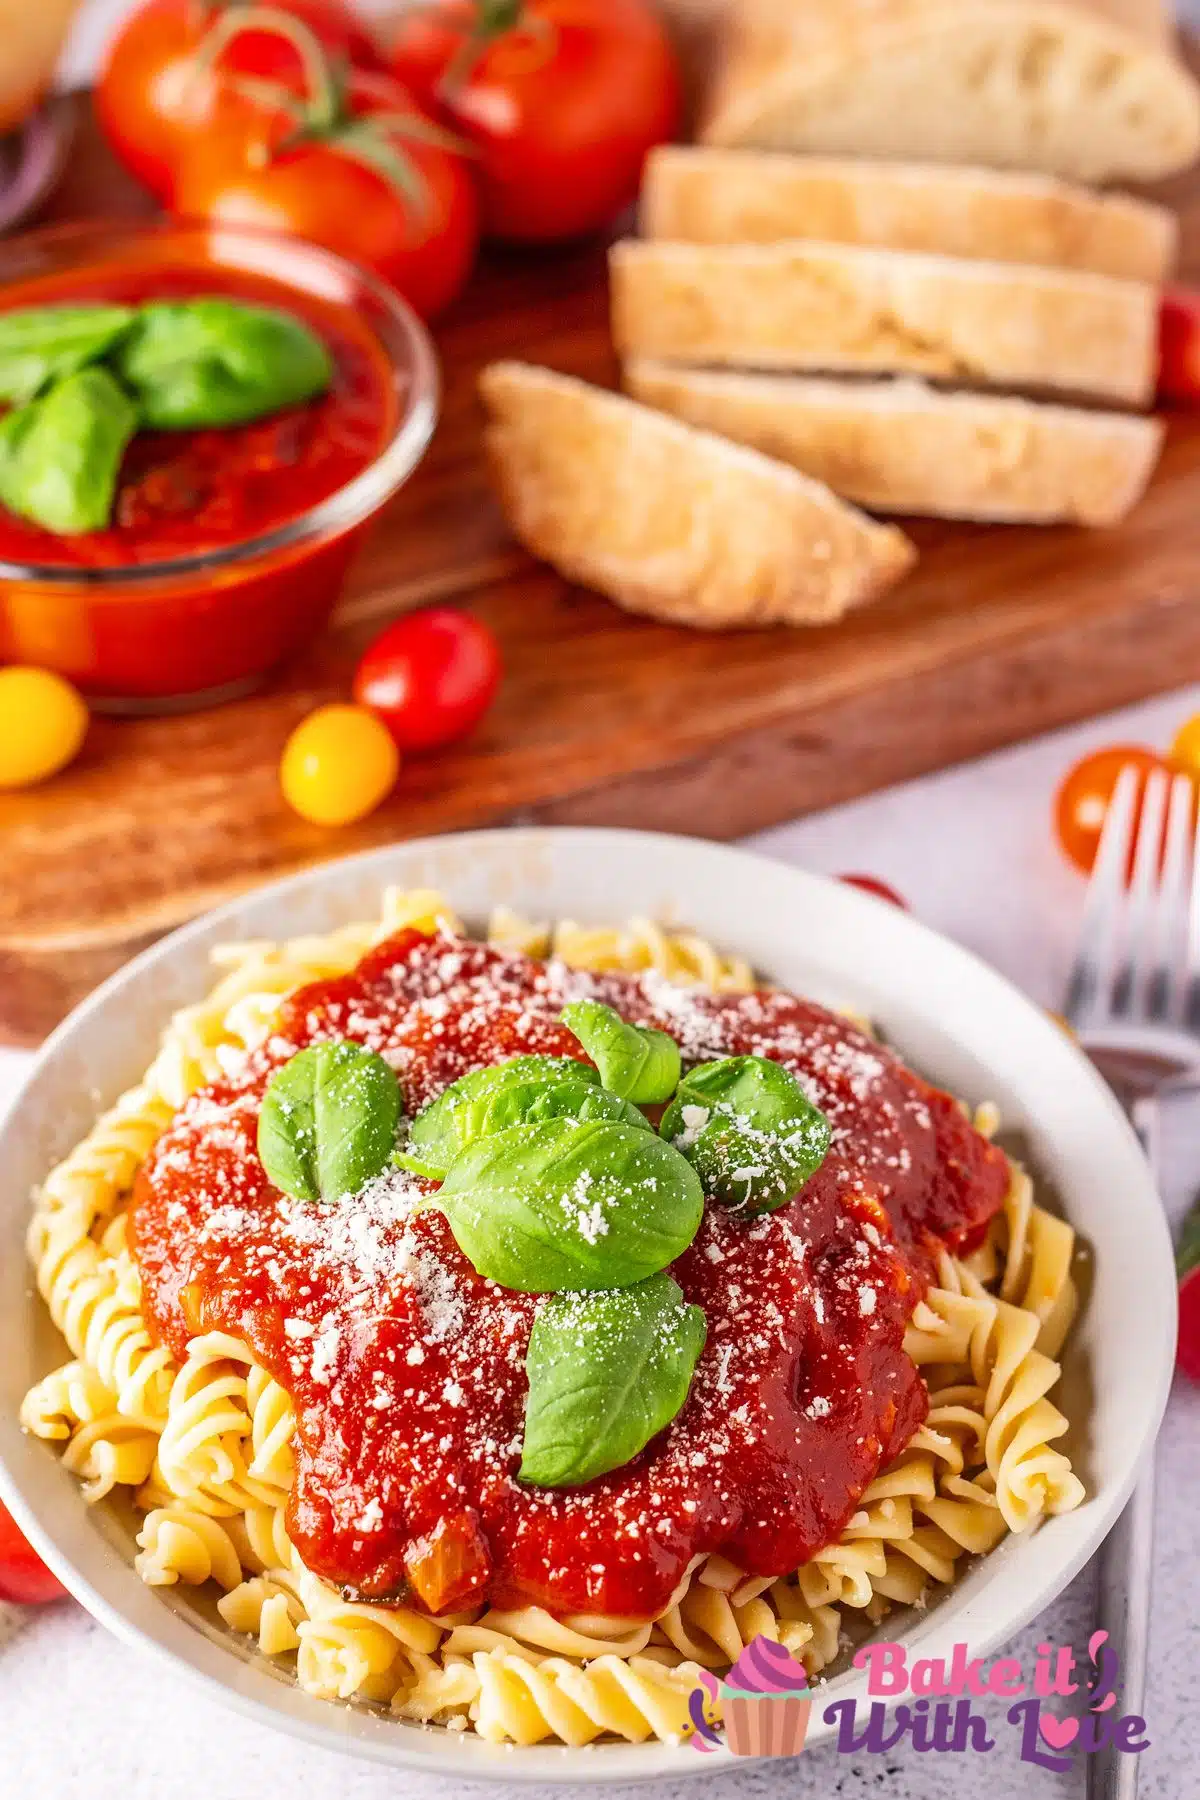 Tasty pomodoro sauce served over pasta and topped with fresh basil leaves and Parmesan cheese.